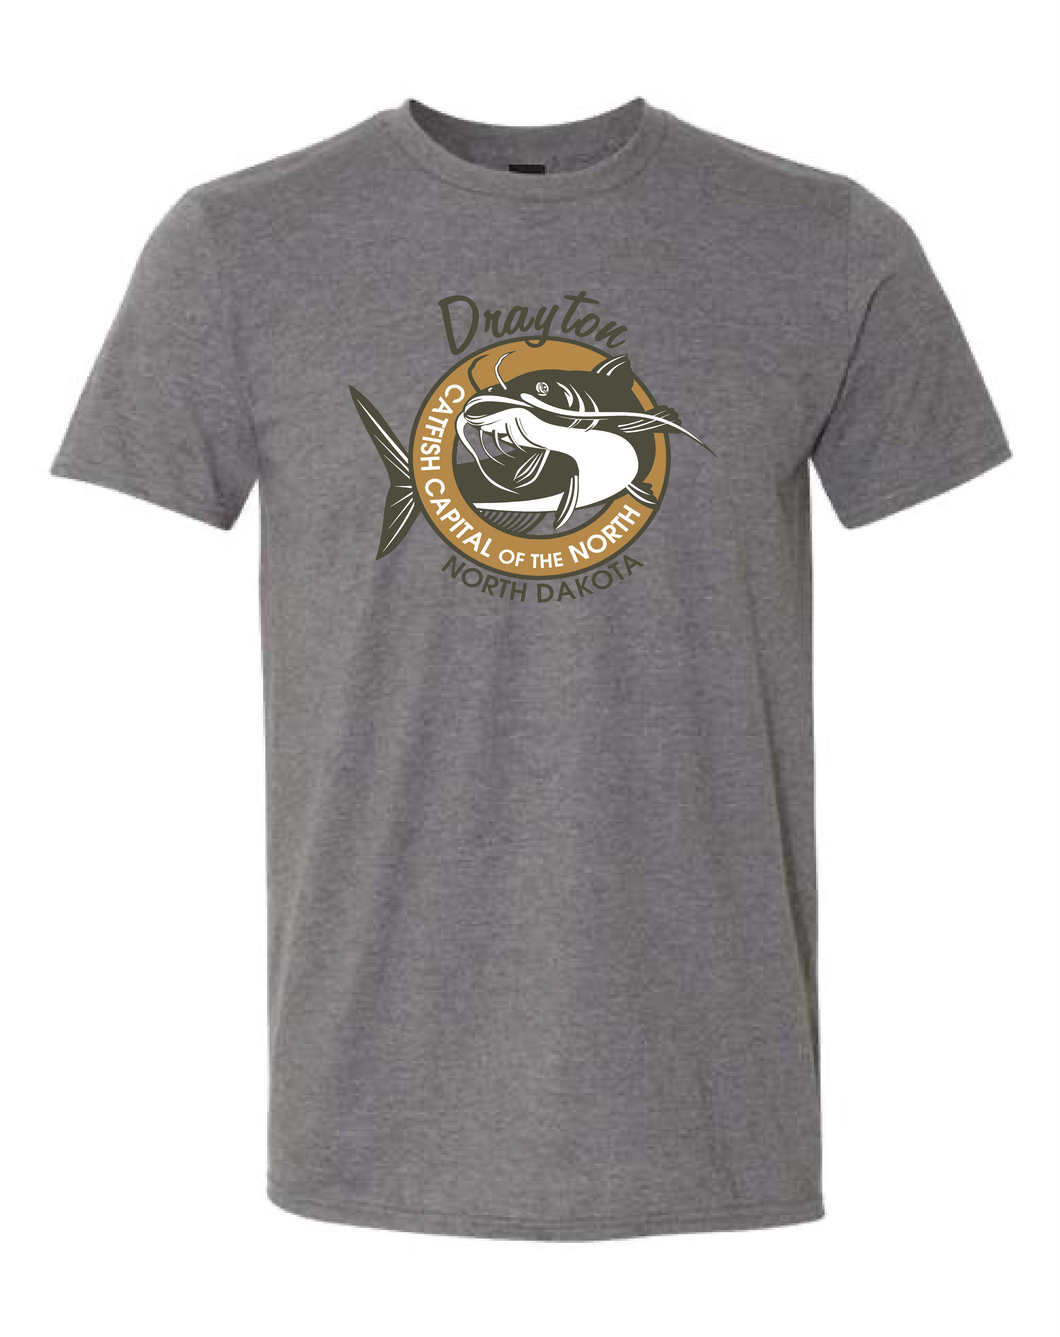 Catfish Capital of the North Graphic T-shirt